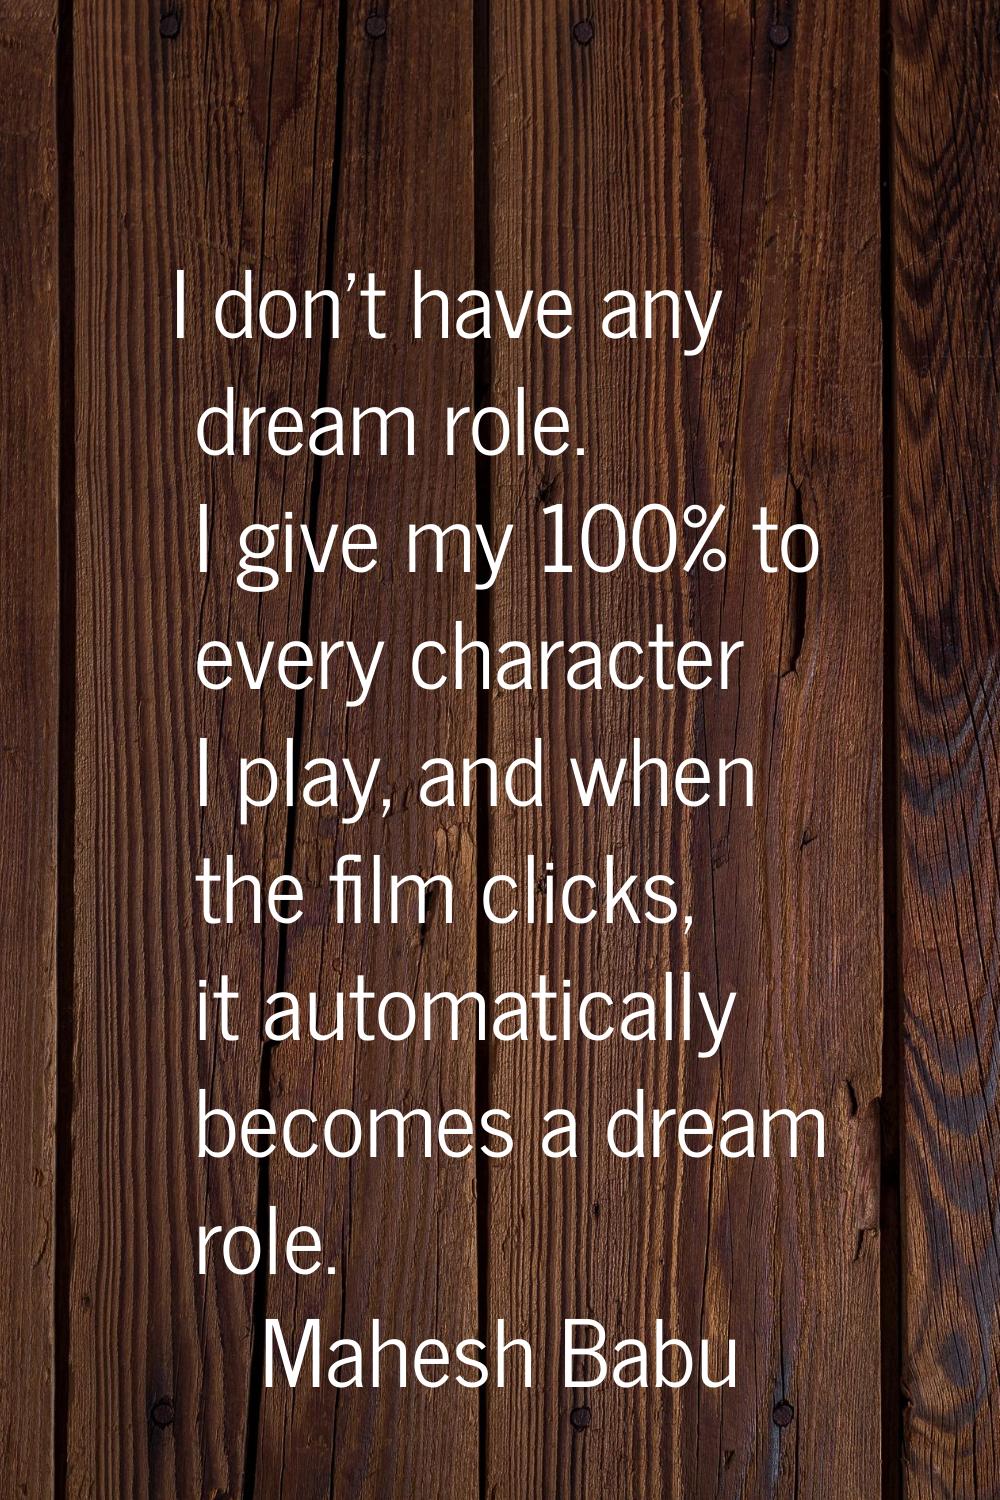 I don't have any dream role. I give my 100% to every character I play, and when the film clicks, it